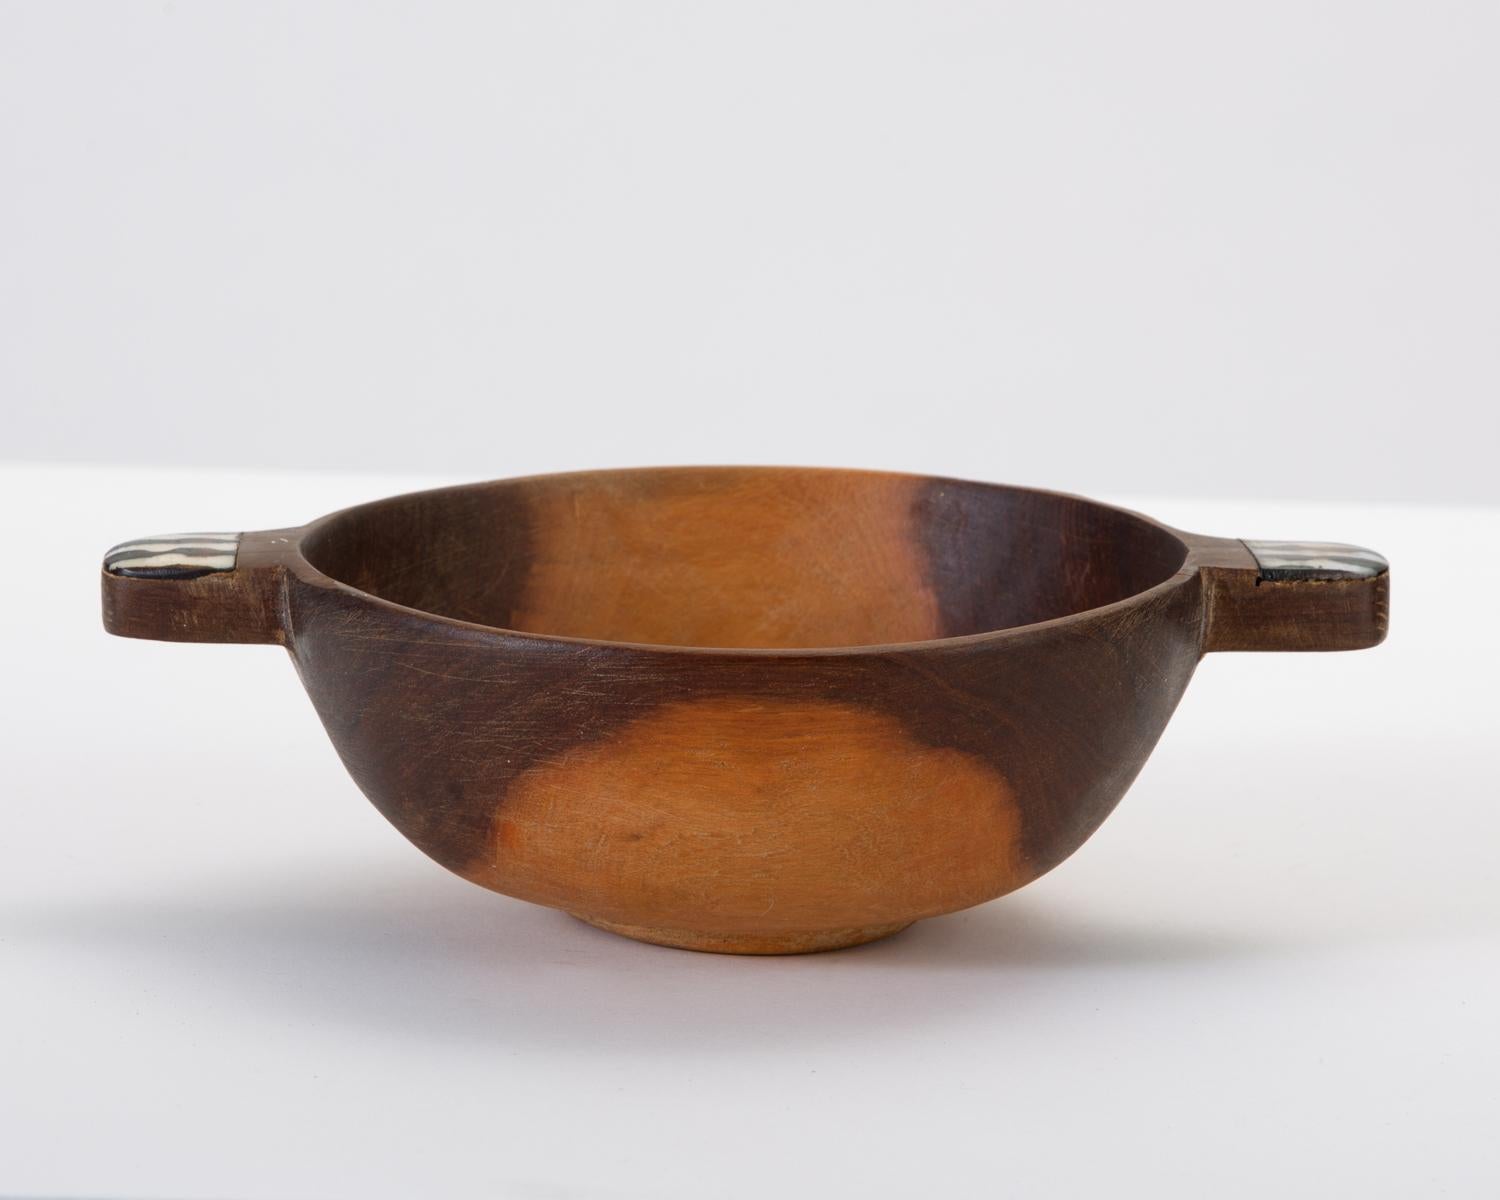 A handmade African sandalwood bowl with handles in a rough-hewn style. A wide band of contrasting sapwood lends a well-chosen symmetry to the overt rusticity of the traditional design. The handles are notched to accommodate the inset bone accents,